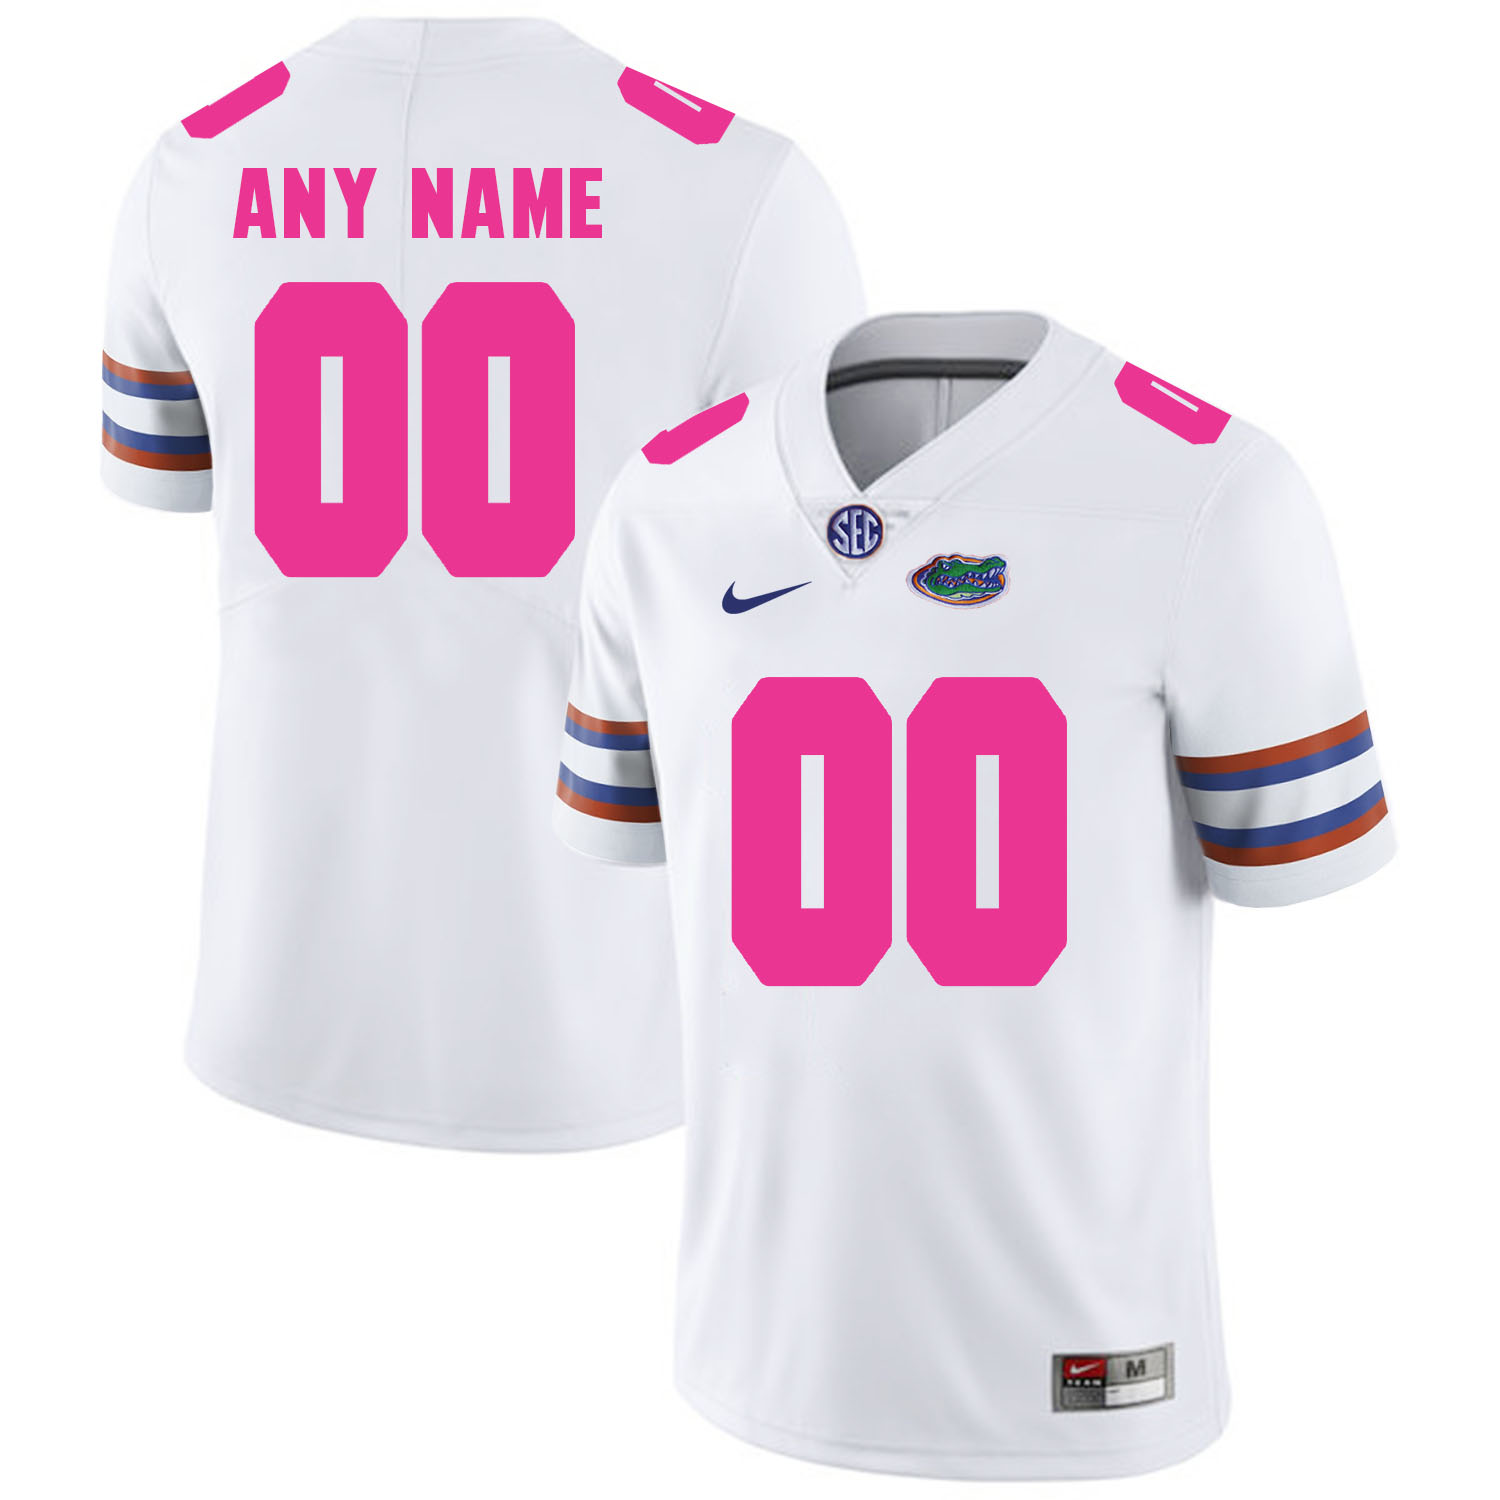 Florida Gators White Men's Customized 2018 Breast Cancer Awareness College Football Jersey